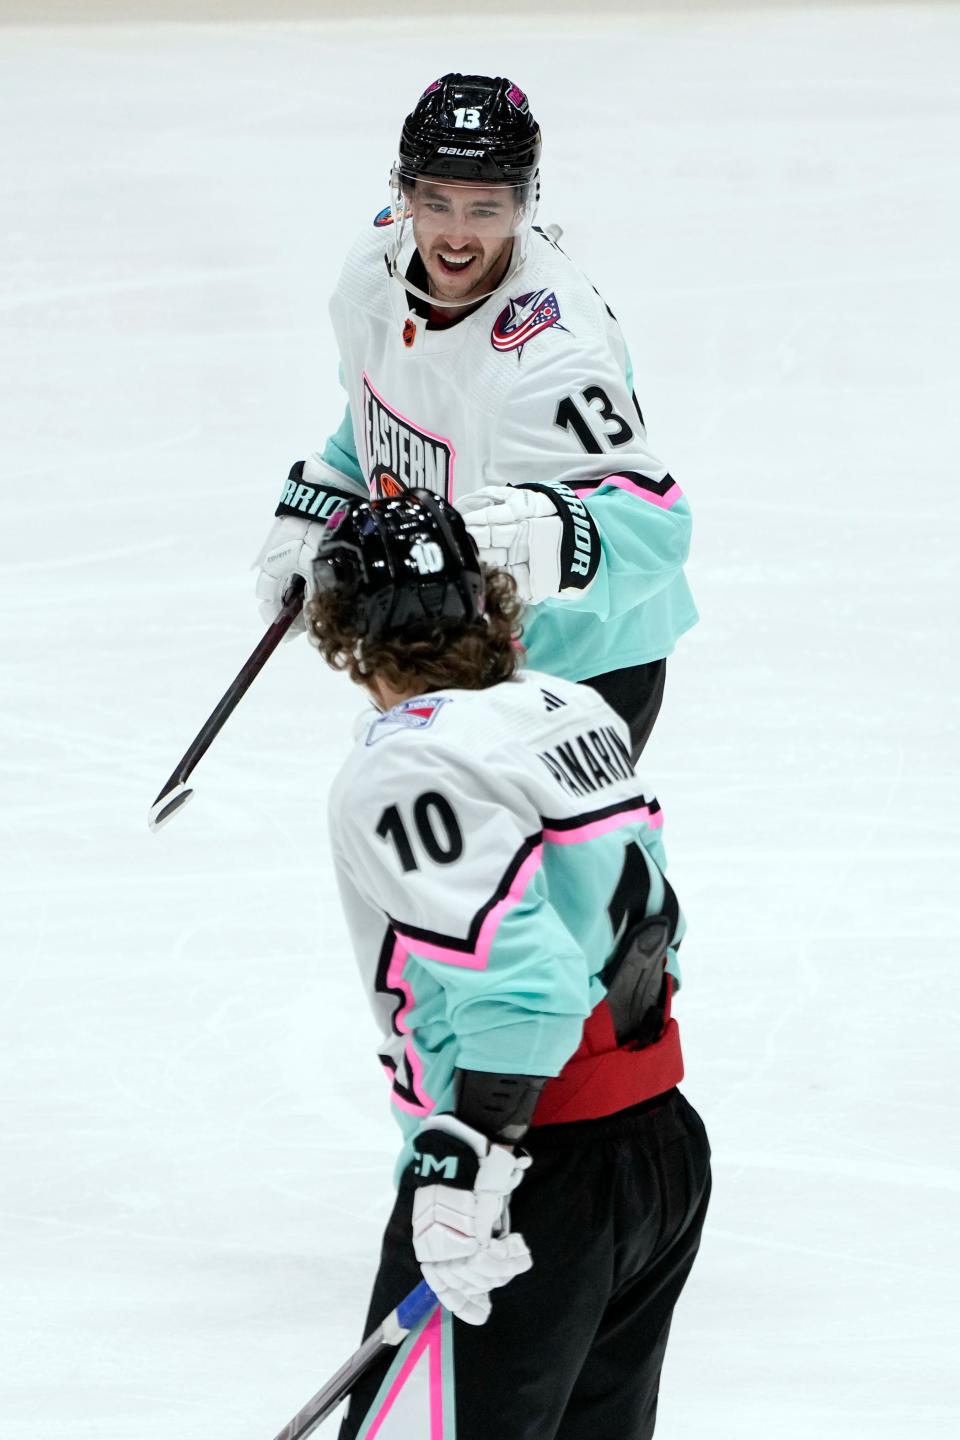 Blue Jackets forward Johnny Gaudreau (13) celebrates with the Rangers' Artemi Panarin after scoring a goal during the NHL All-Star Game.